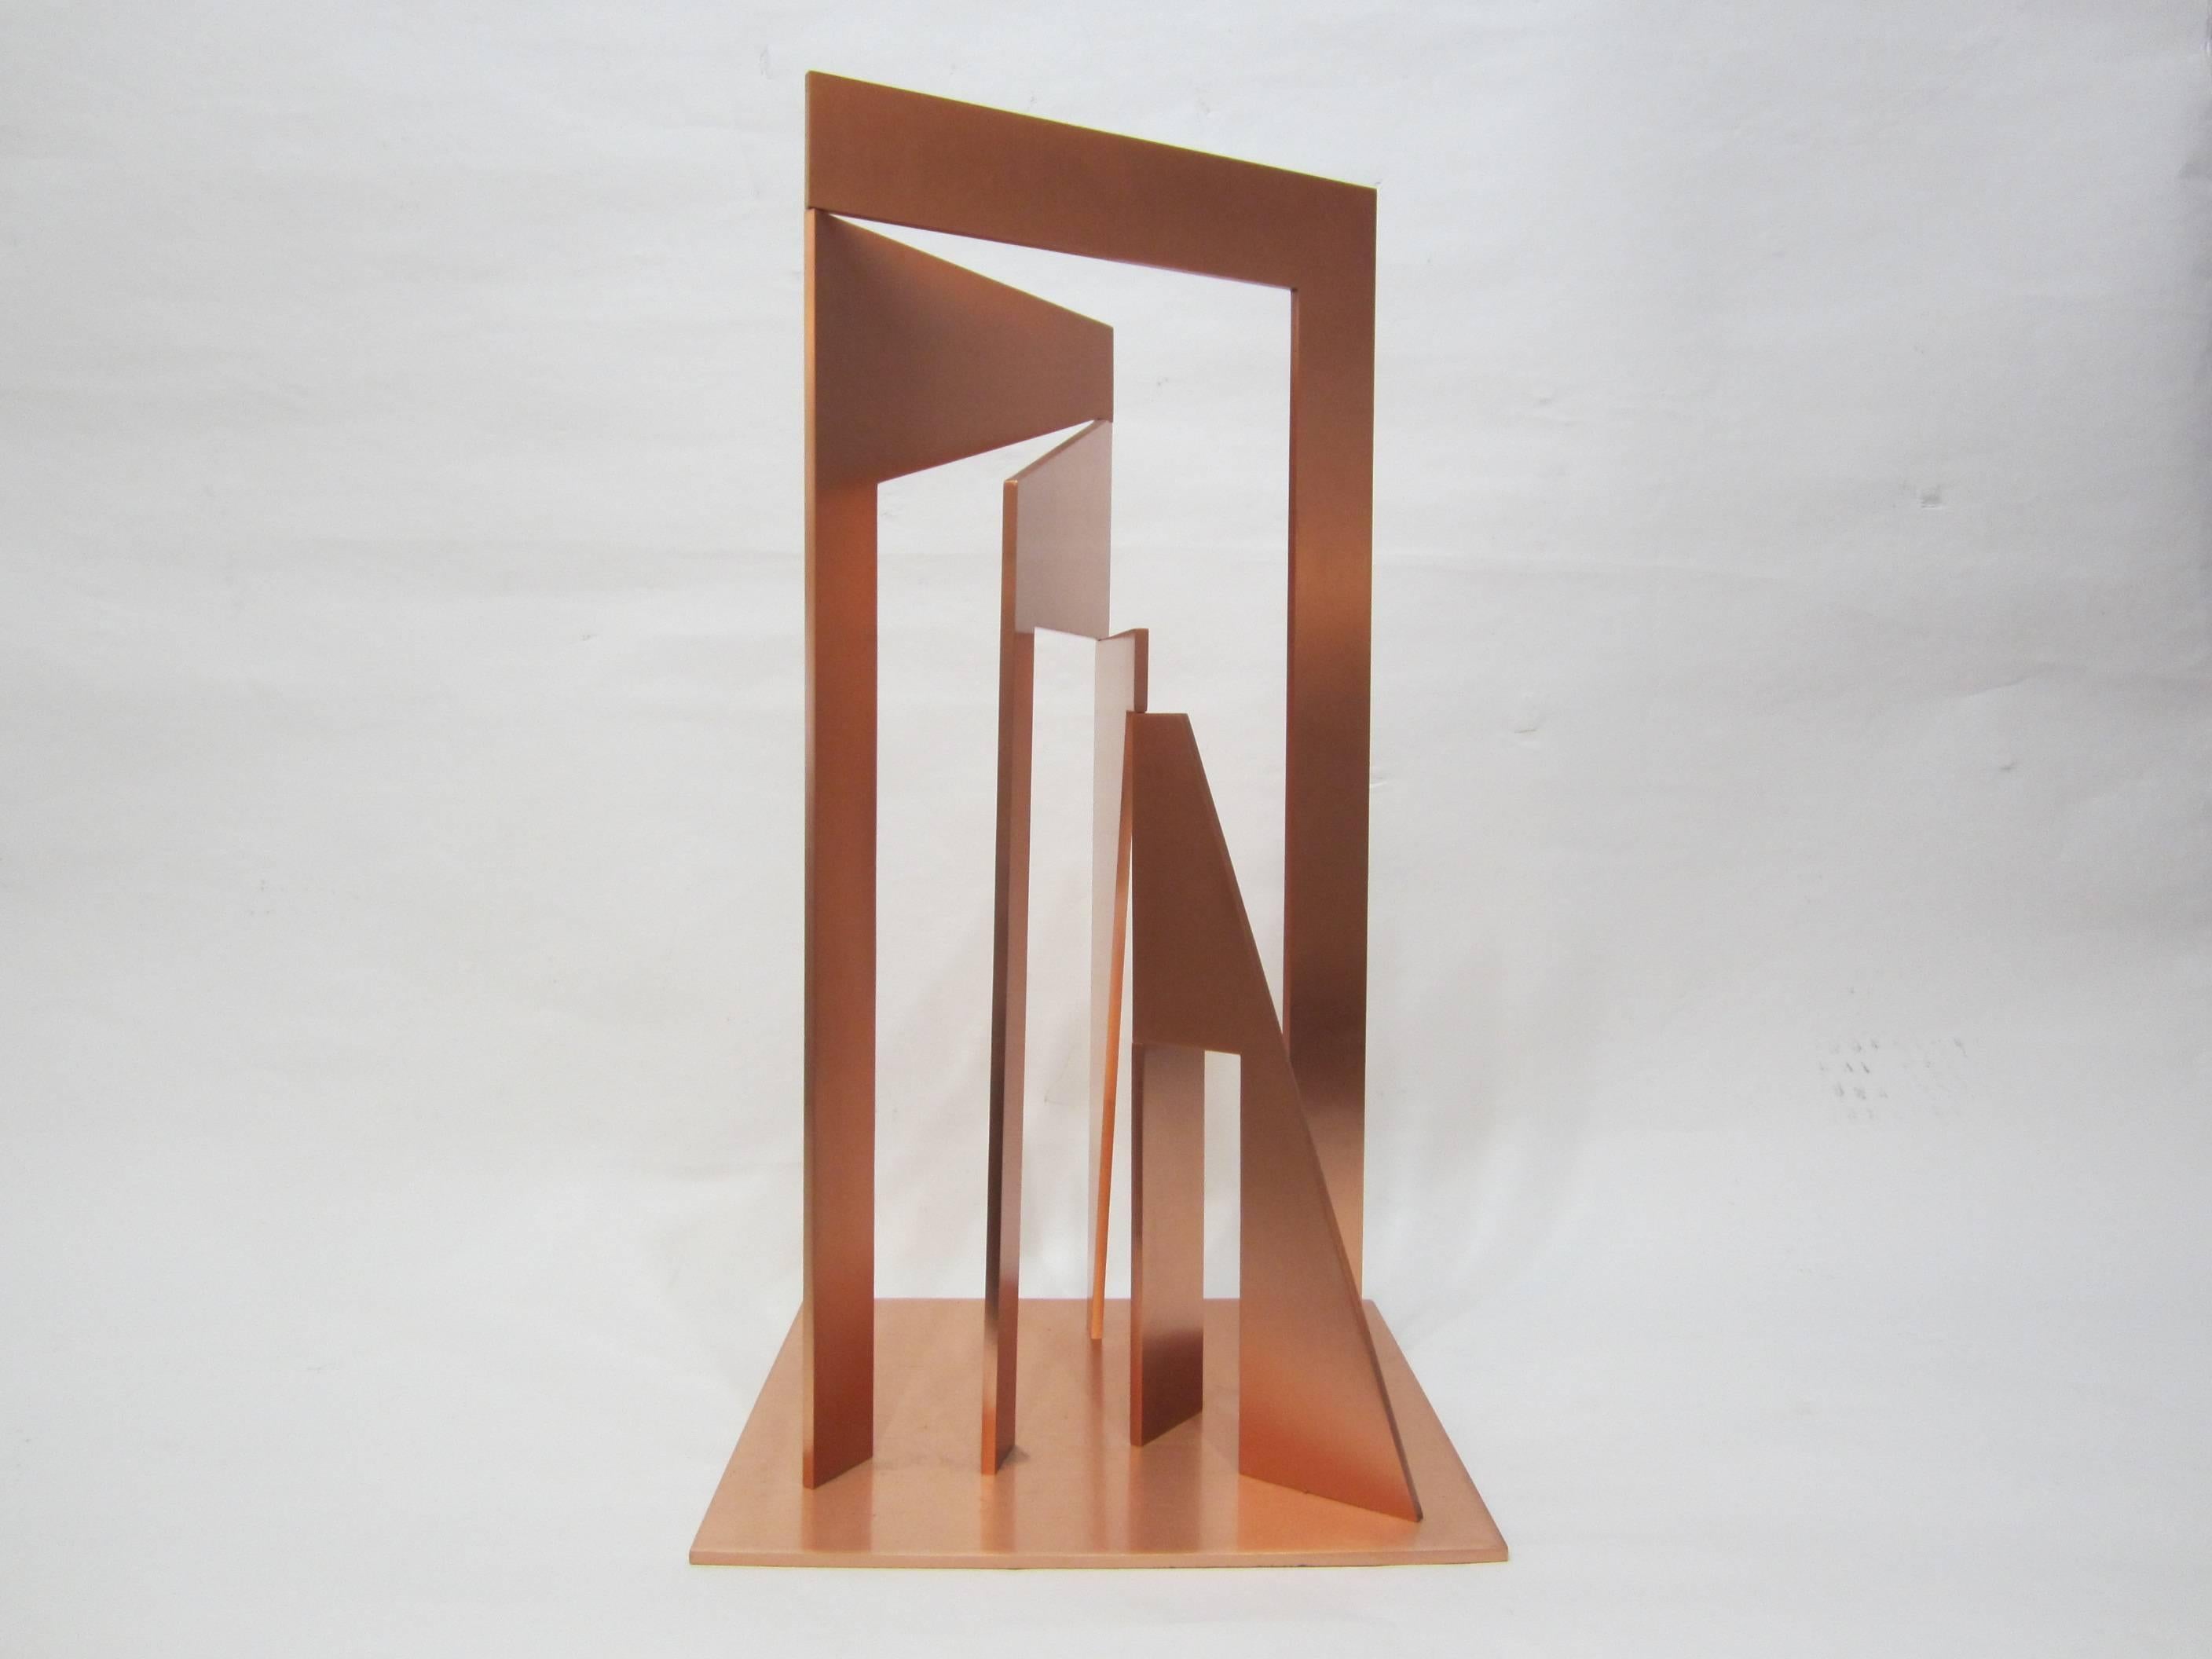 Industrial Christopher Georgesco Copper Sculpture Titled 